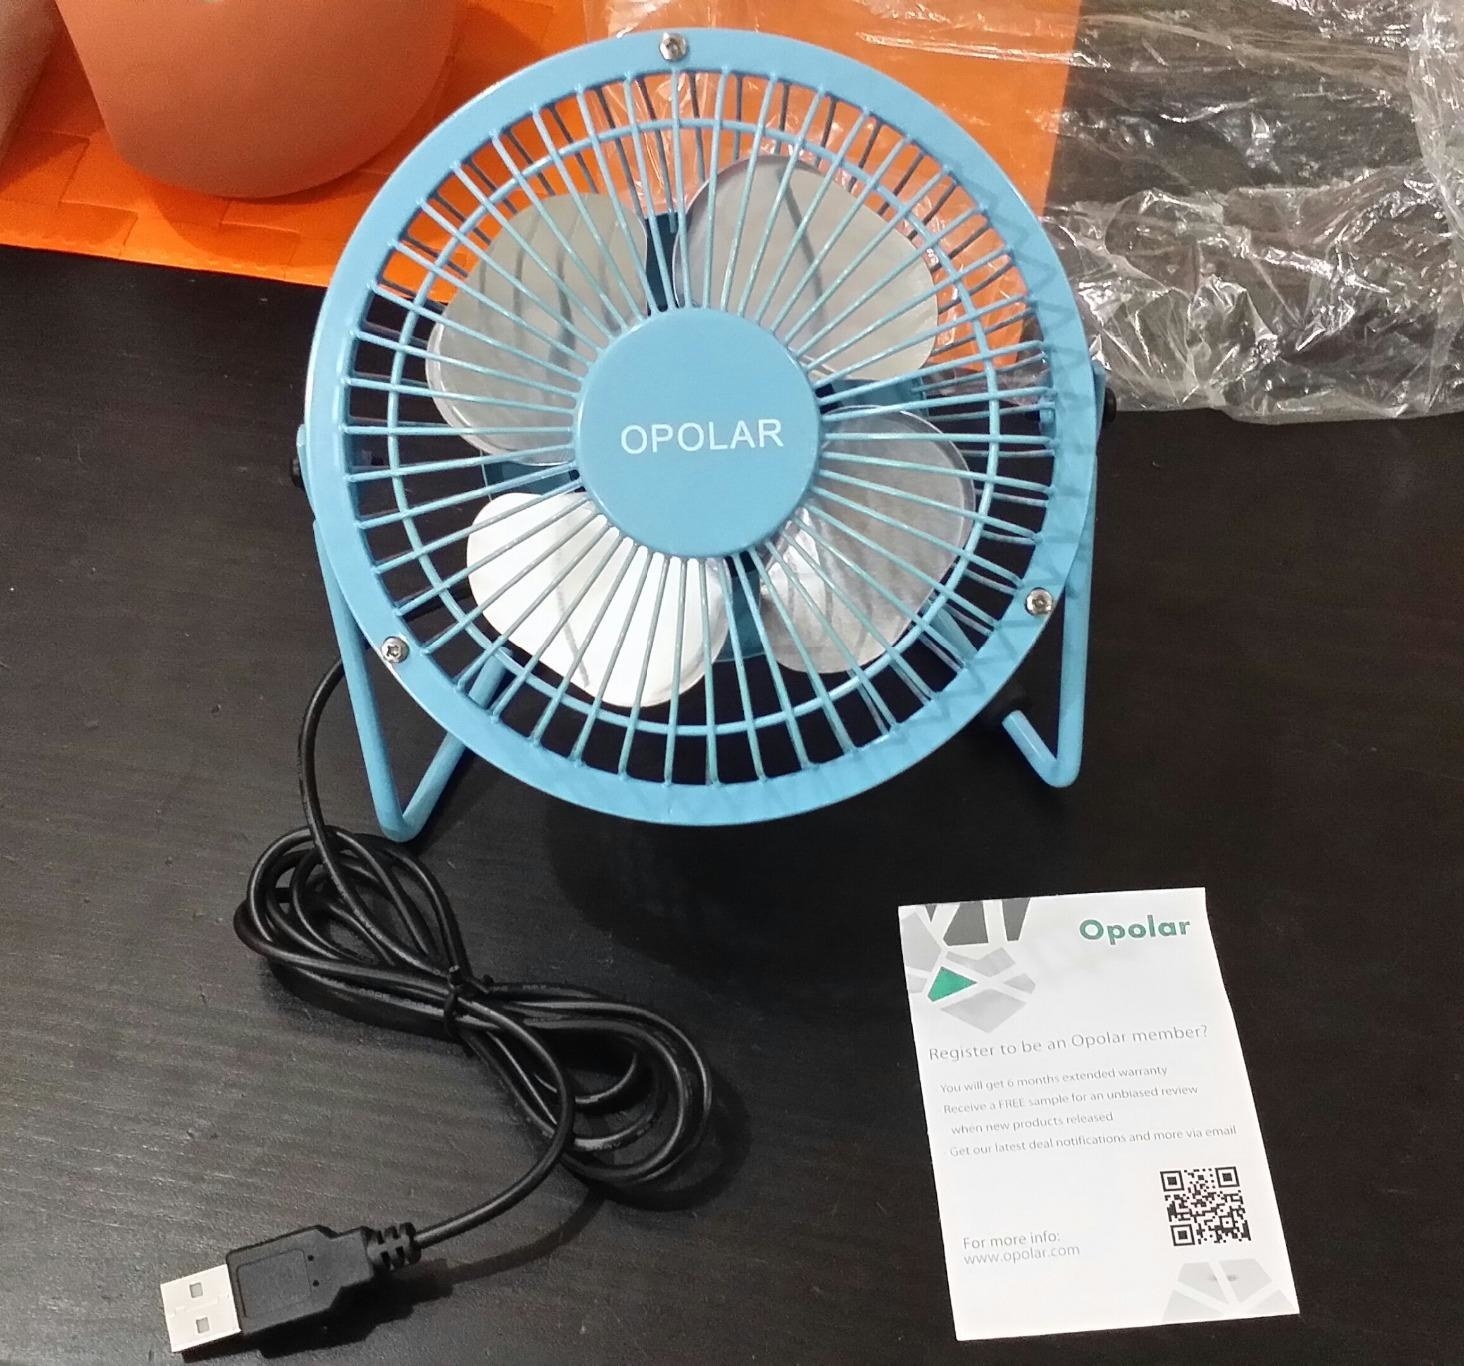 The small, light blue fan with a USB cord